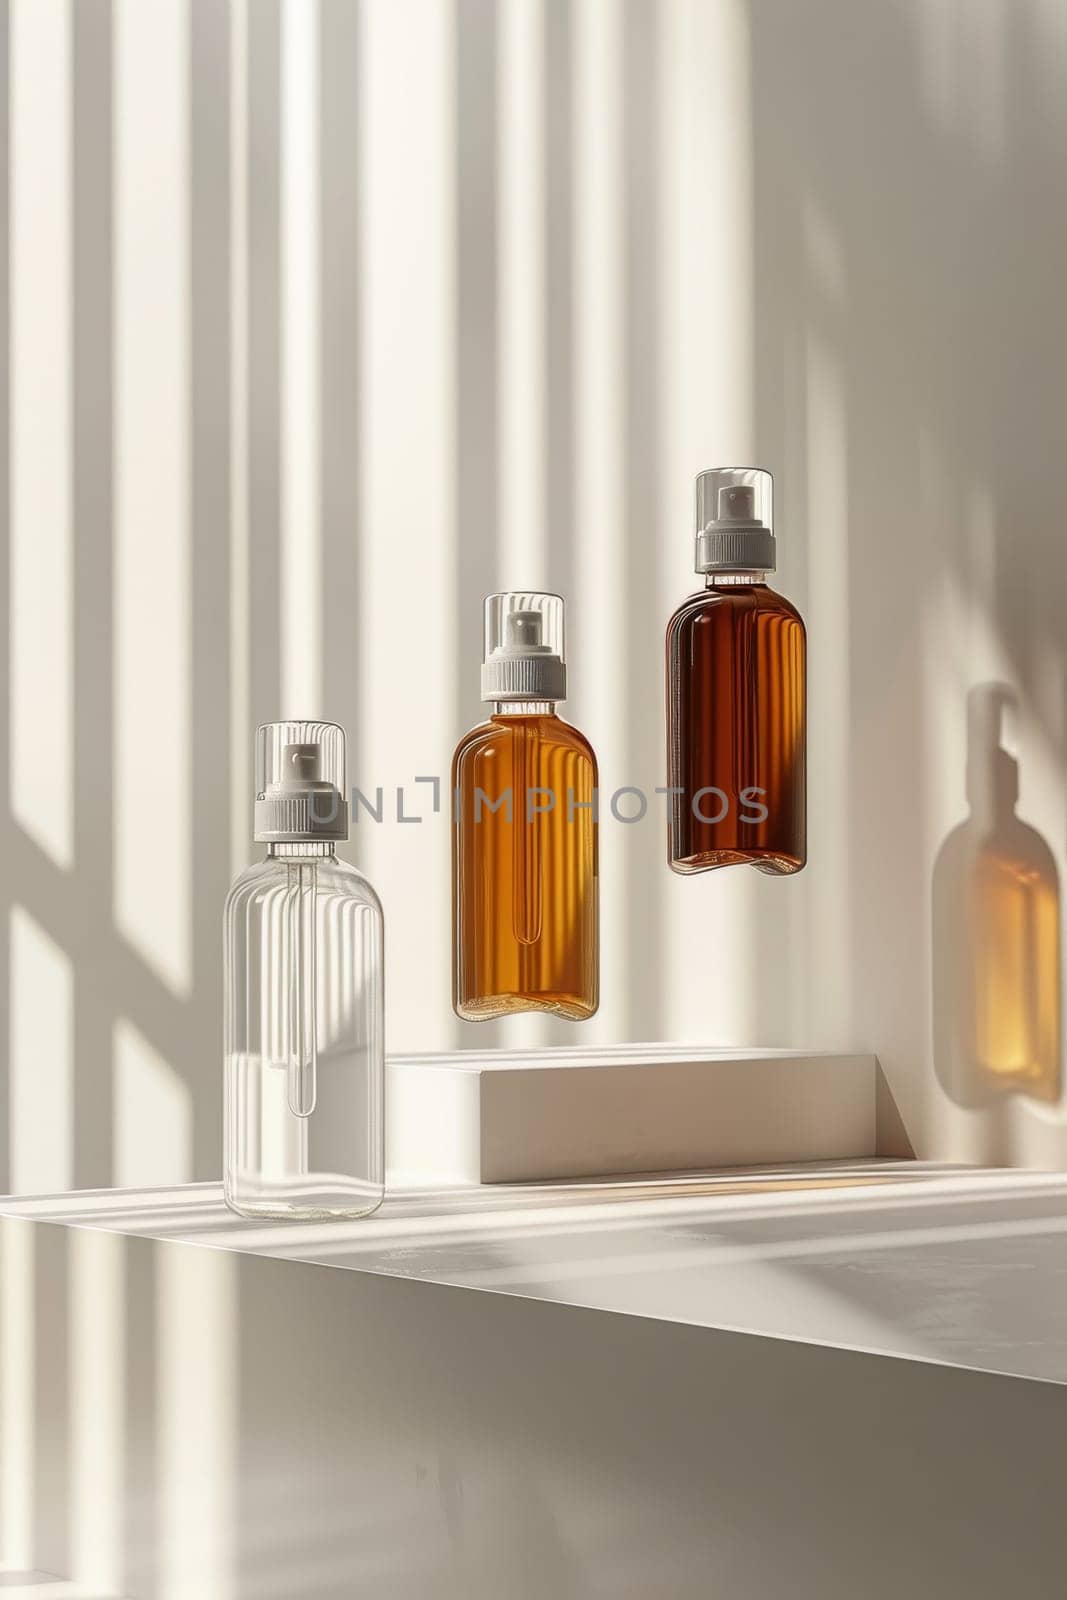 Three bottles of perfume are displayed on a white table, with the person's hands holding them. The bottles are of different colors and sizes, and the scene conveys a sense of luxury and sophistication